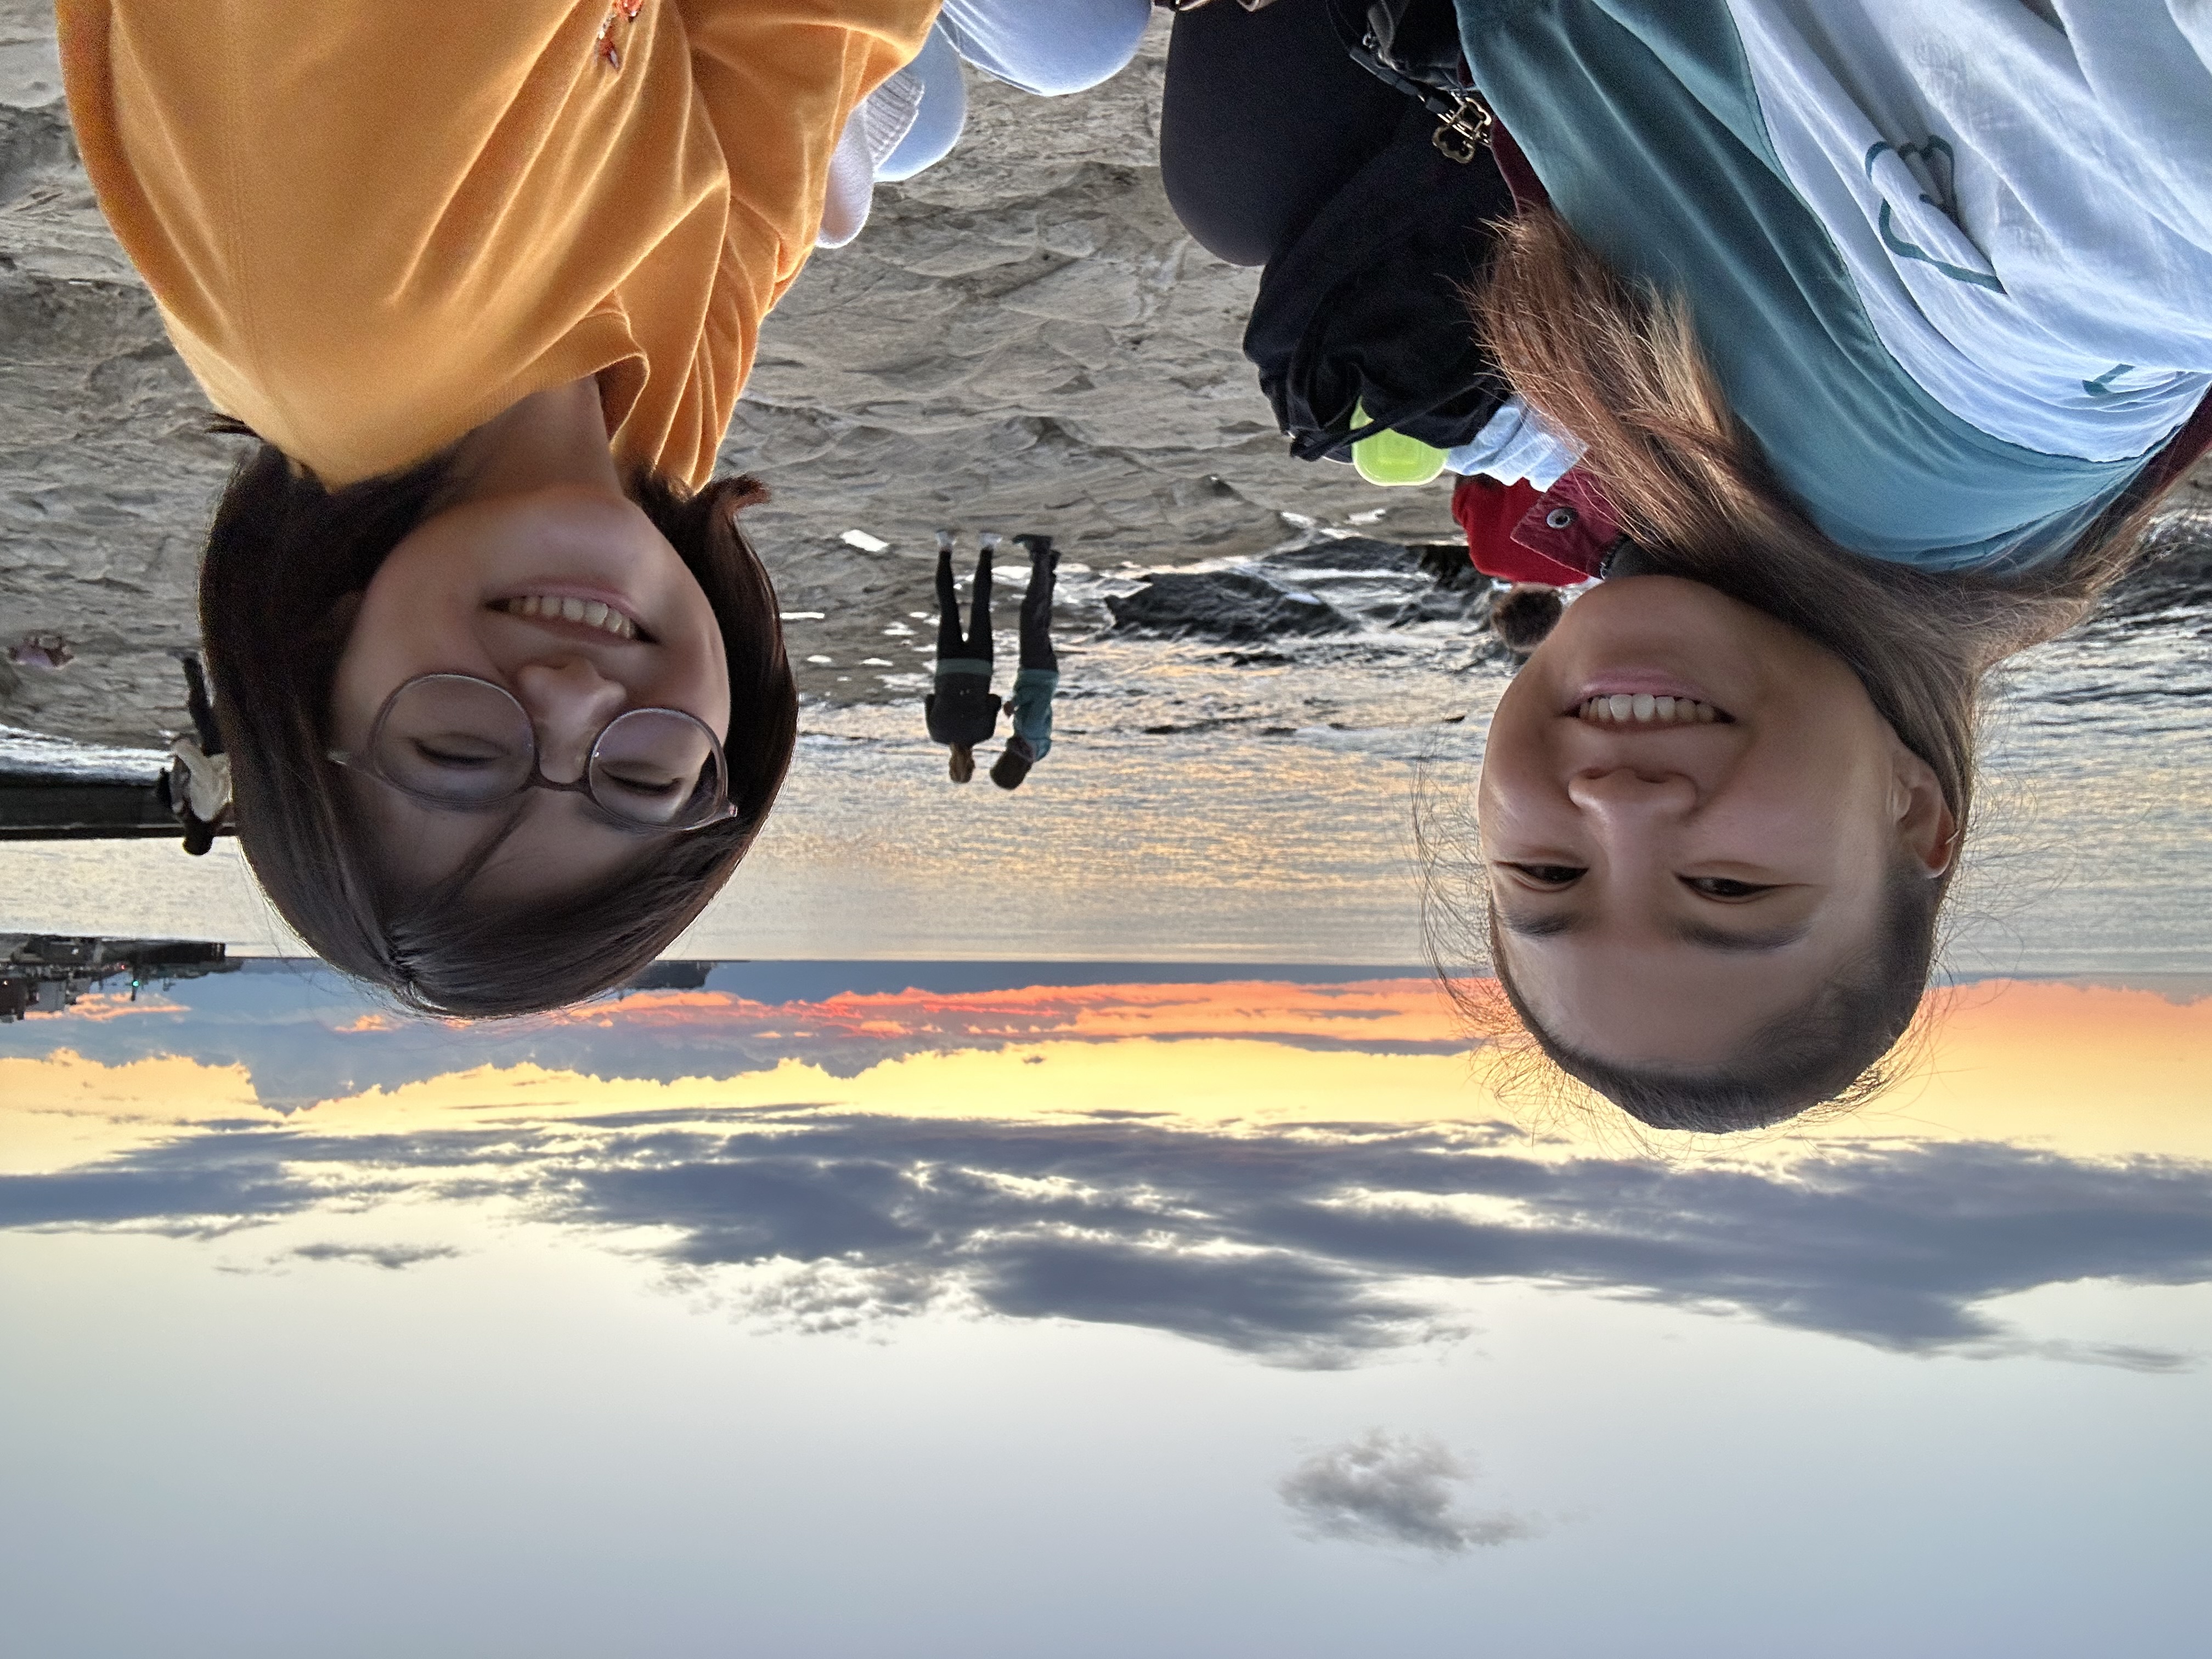 student studying abroad in Japan wearing a yellow crewneck and glasses sitting on a beach with a friend with a sunset in the background